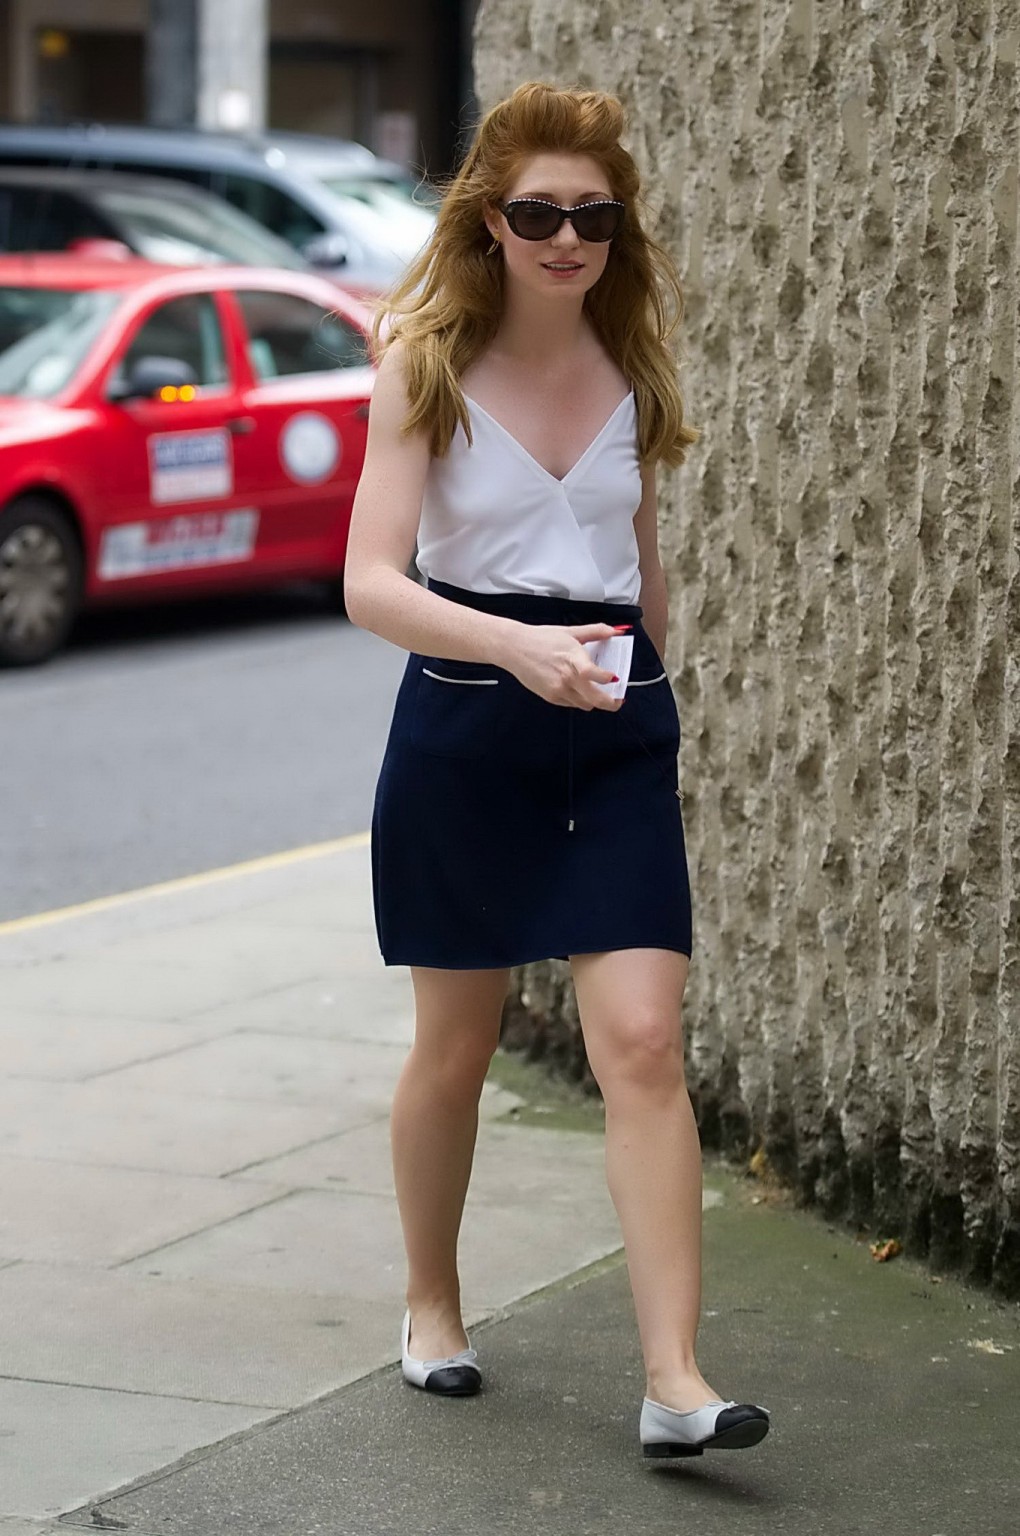 Nicola Roberts braless wearing white sheer top and blue mini skirt out in London #75224093